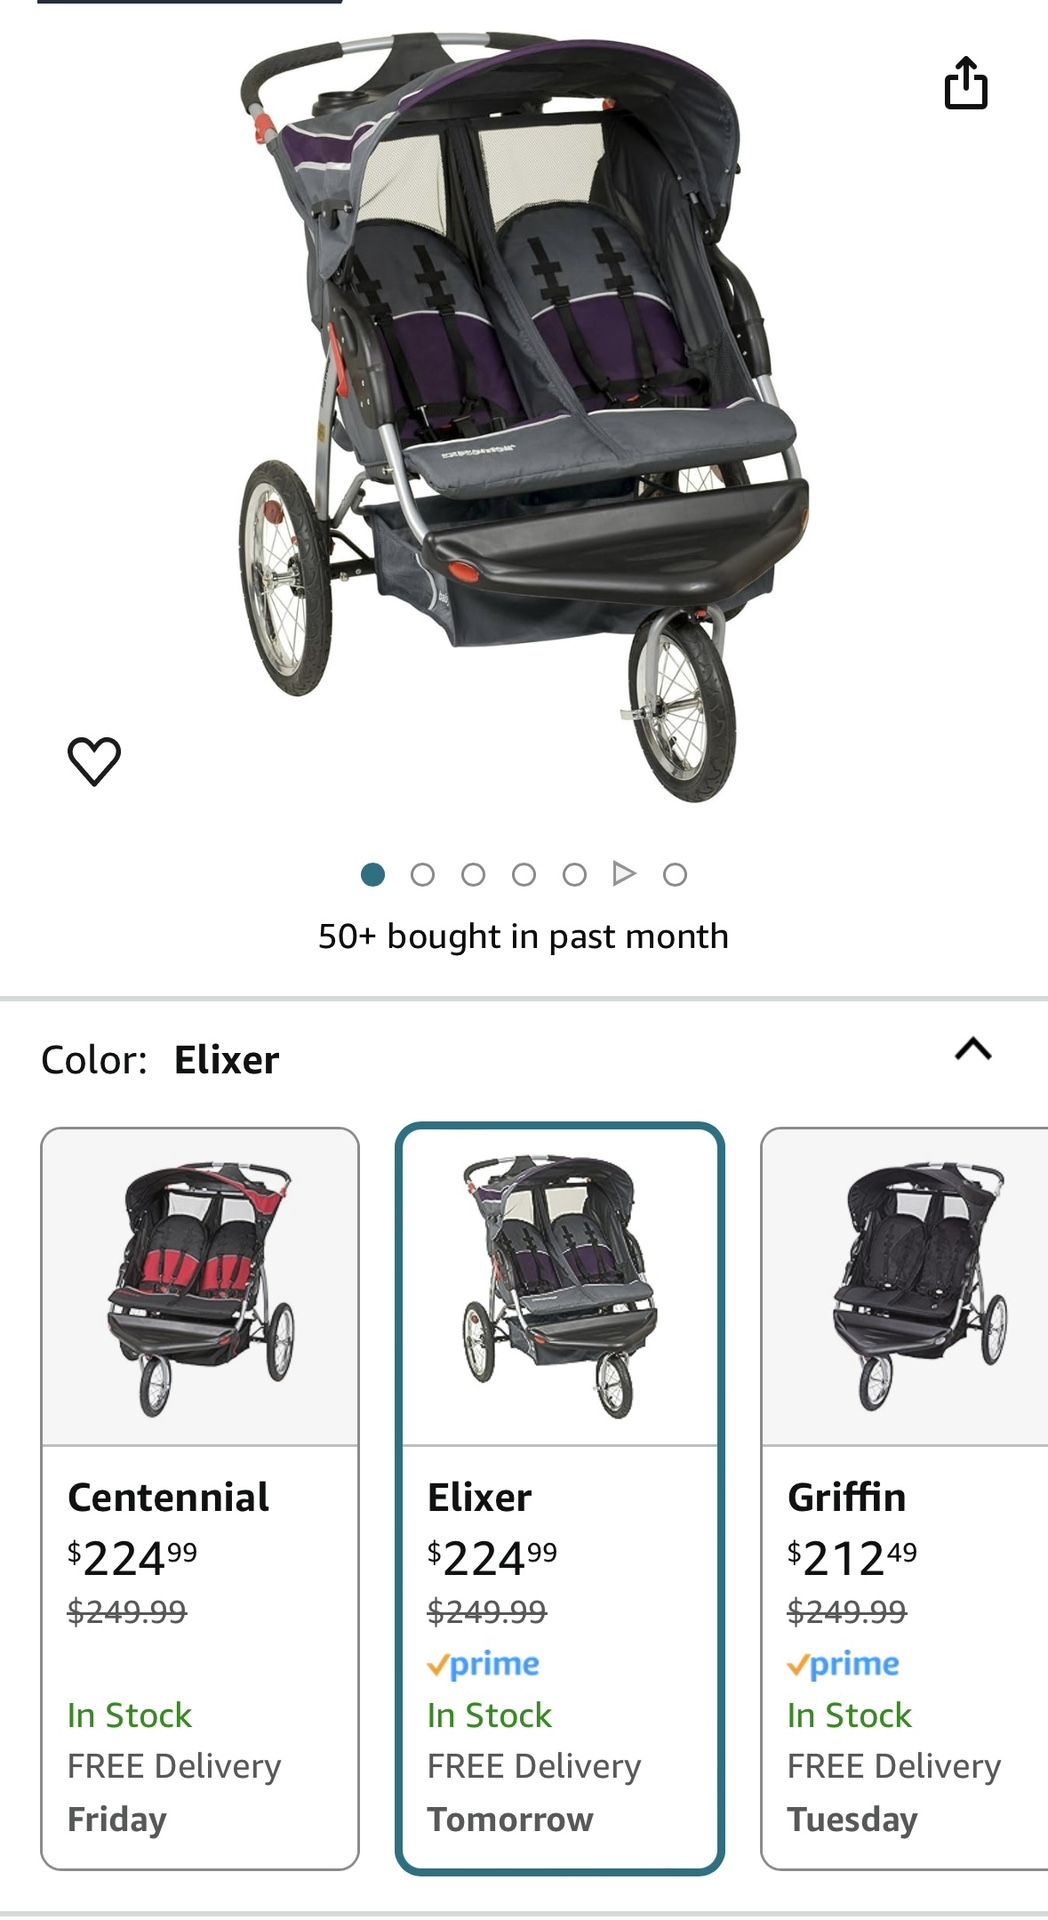 Baby Trend Expedition Double Jogger Stroller